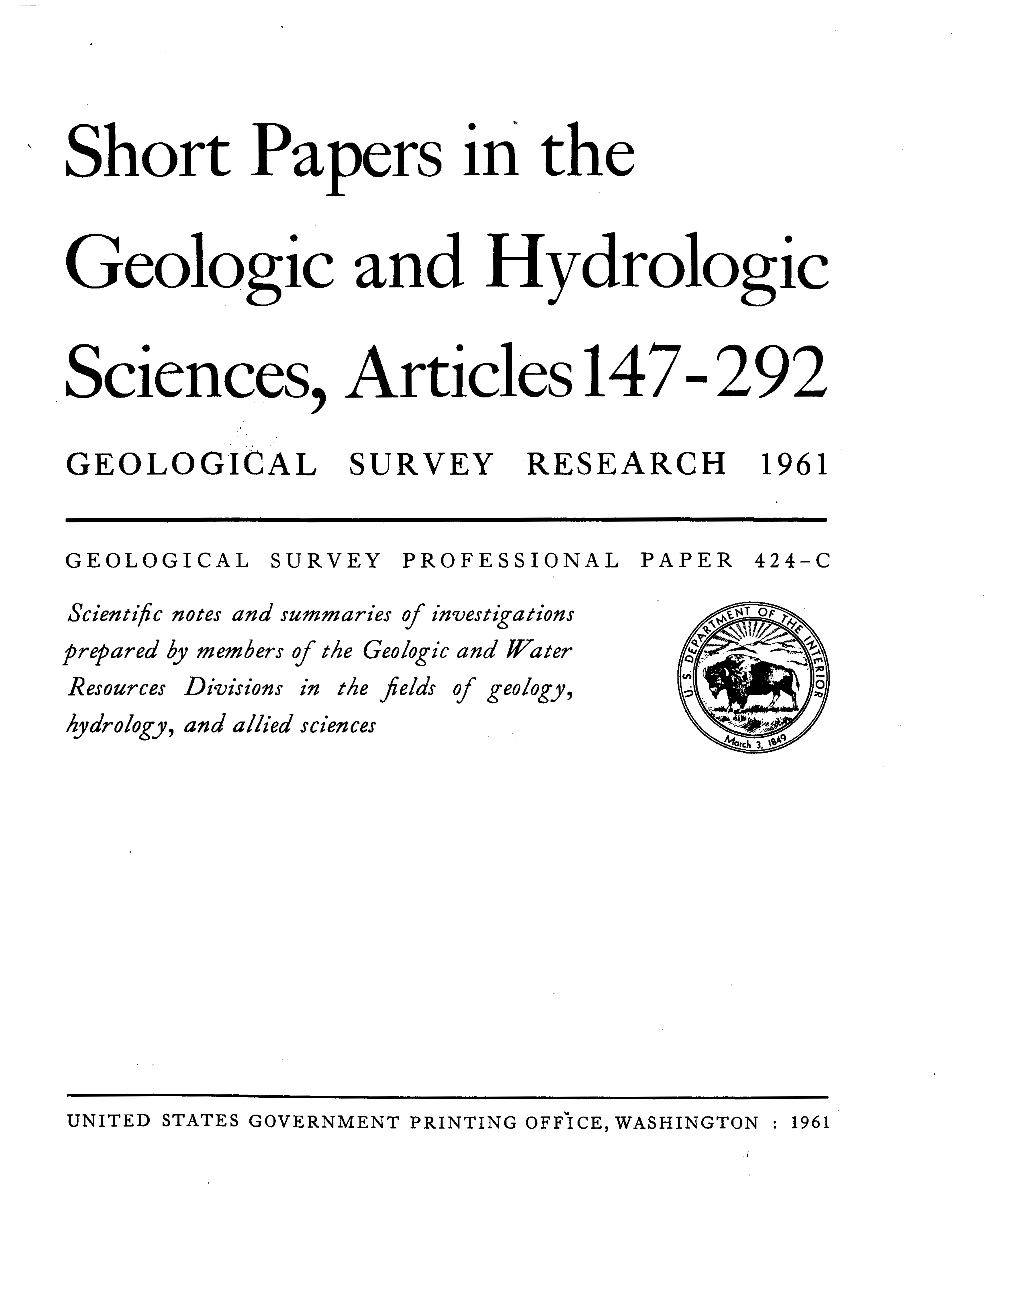 Short Papers in the Geologic and Hydrologic Sciences, Articles 147- 292